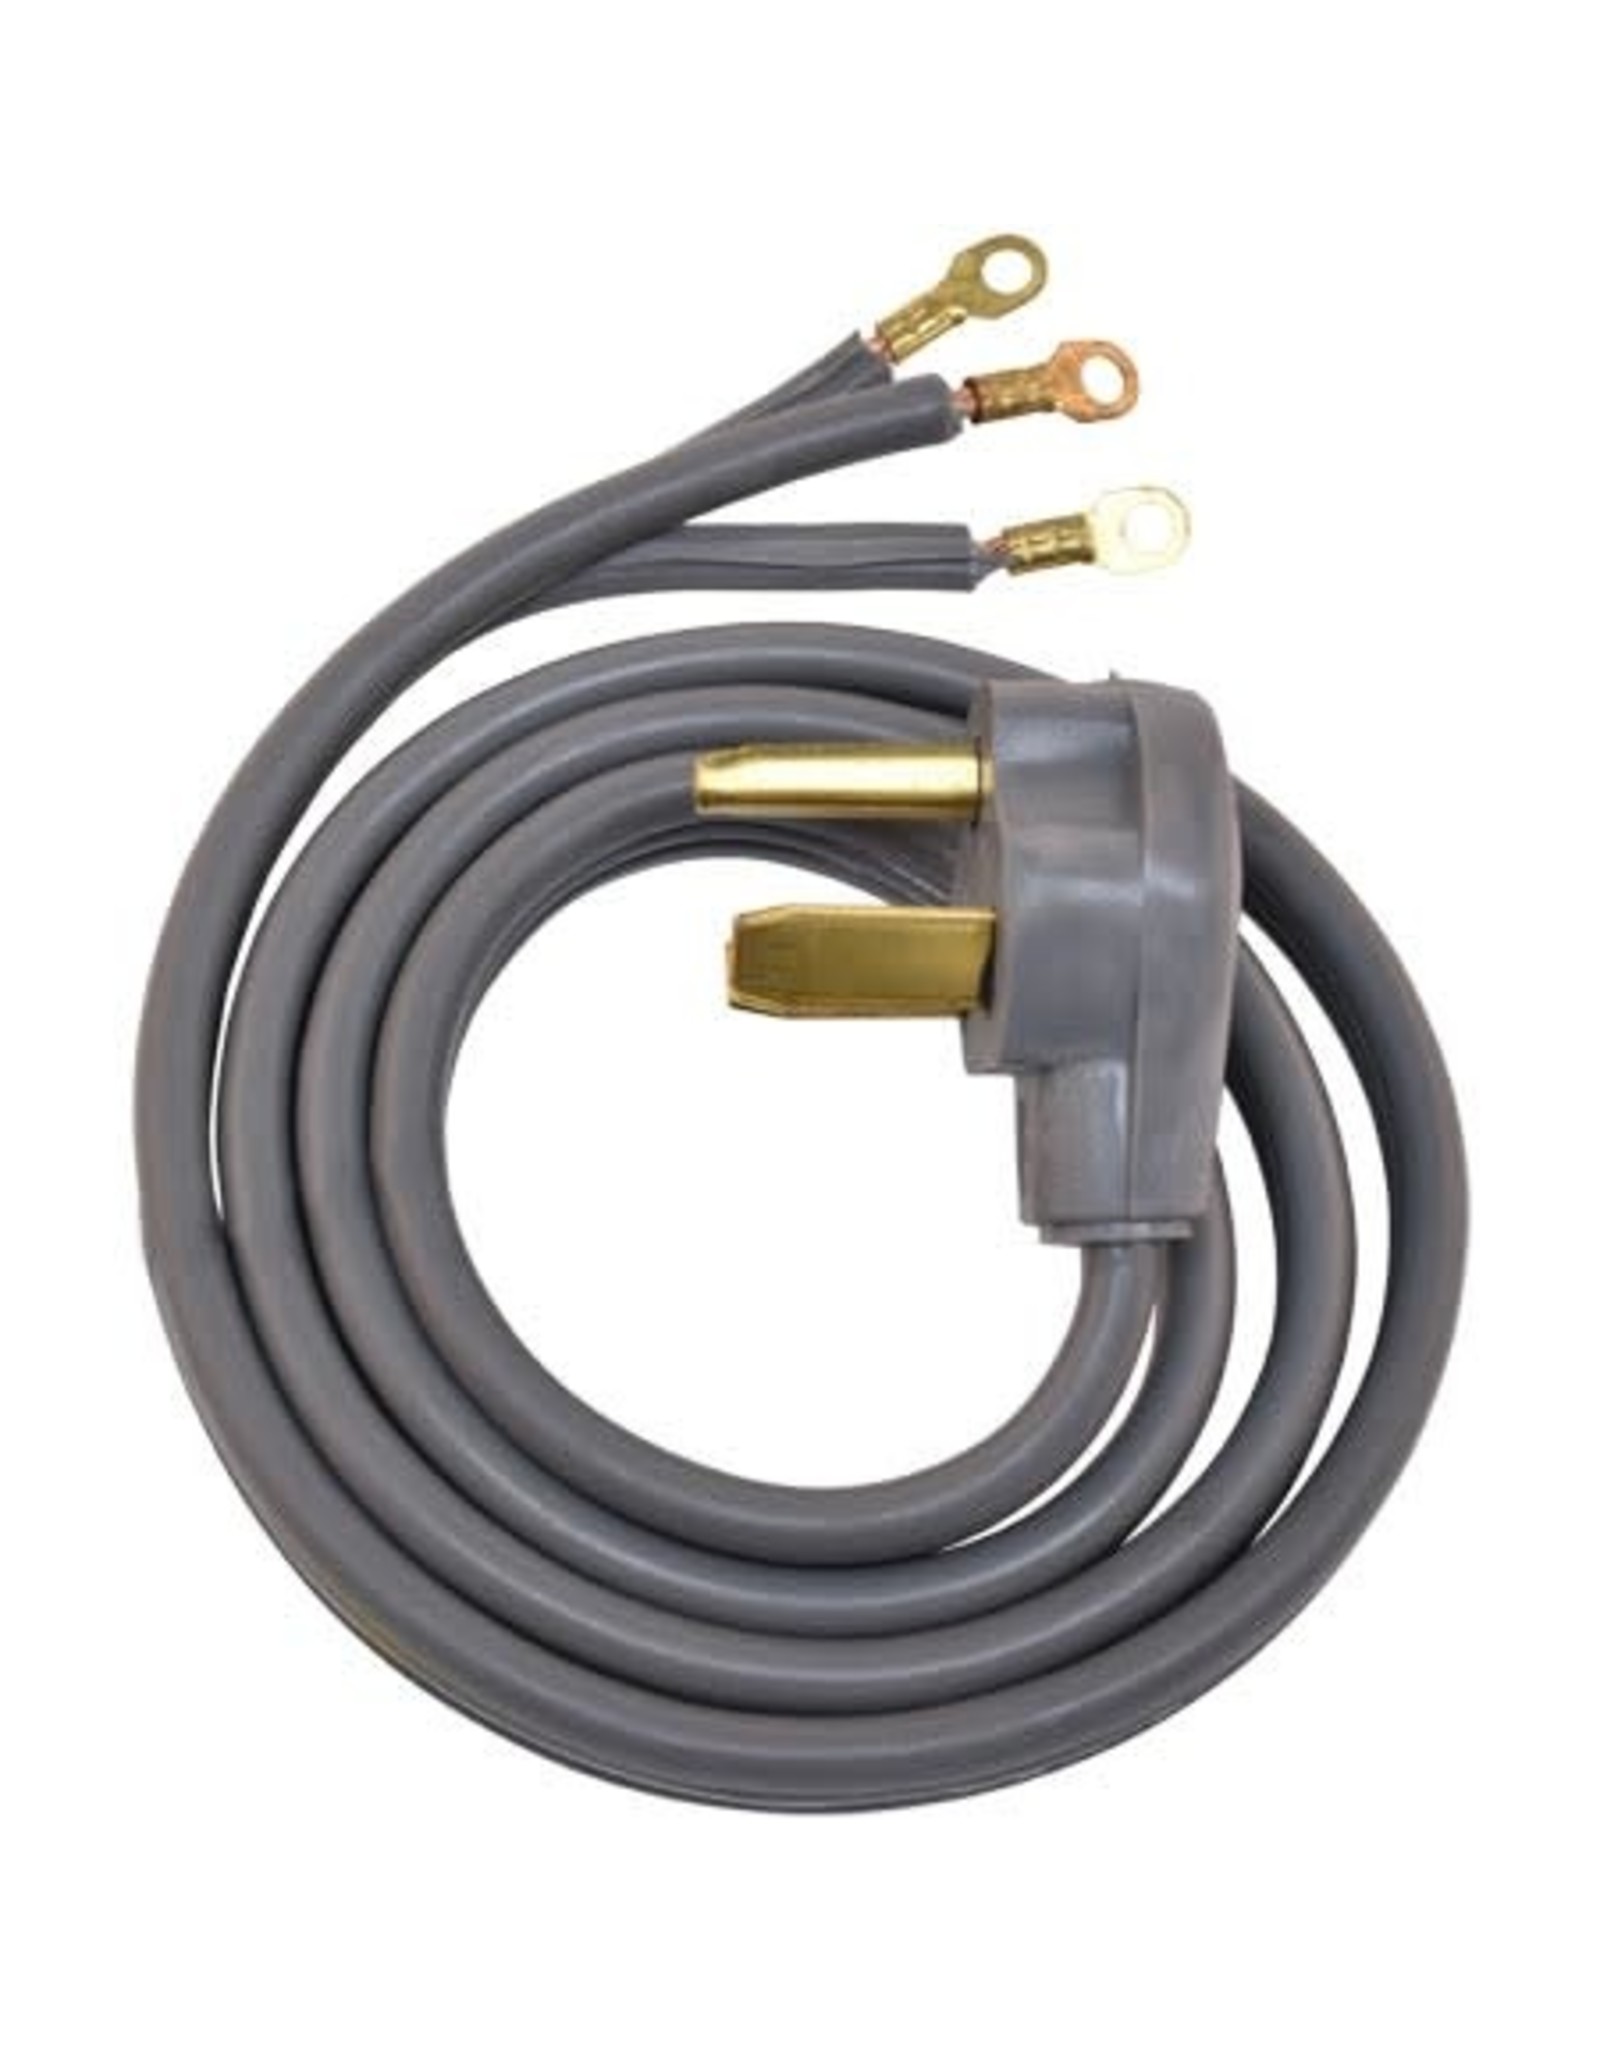 5' ELECTRICAL DRYER CORD 3 WIRE 30 AMP